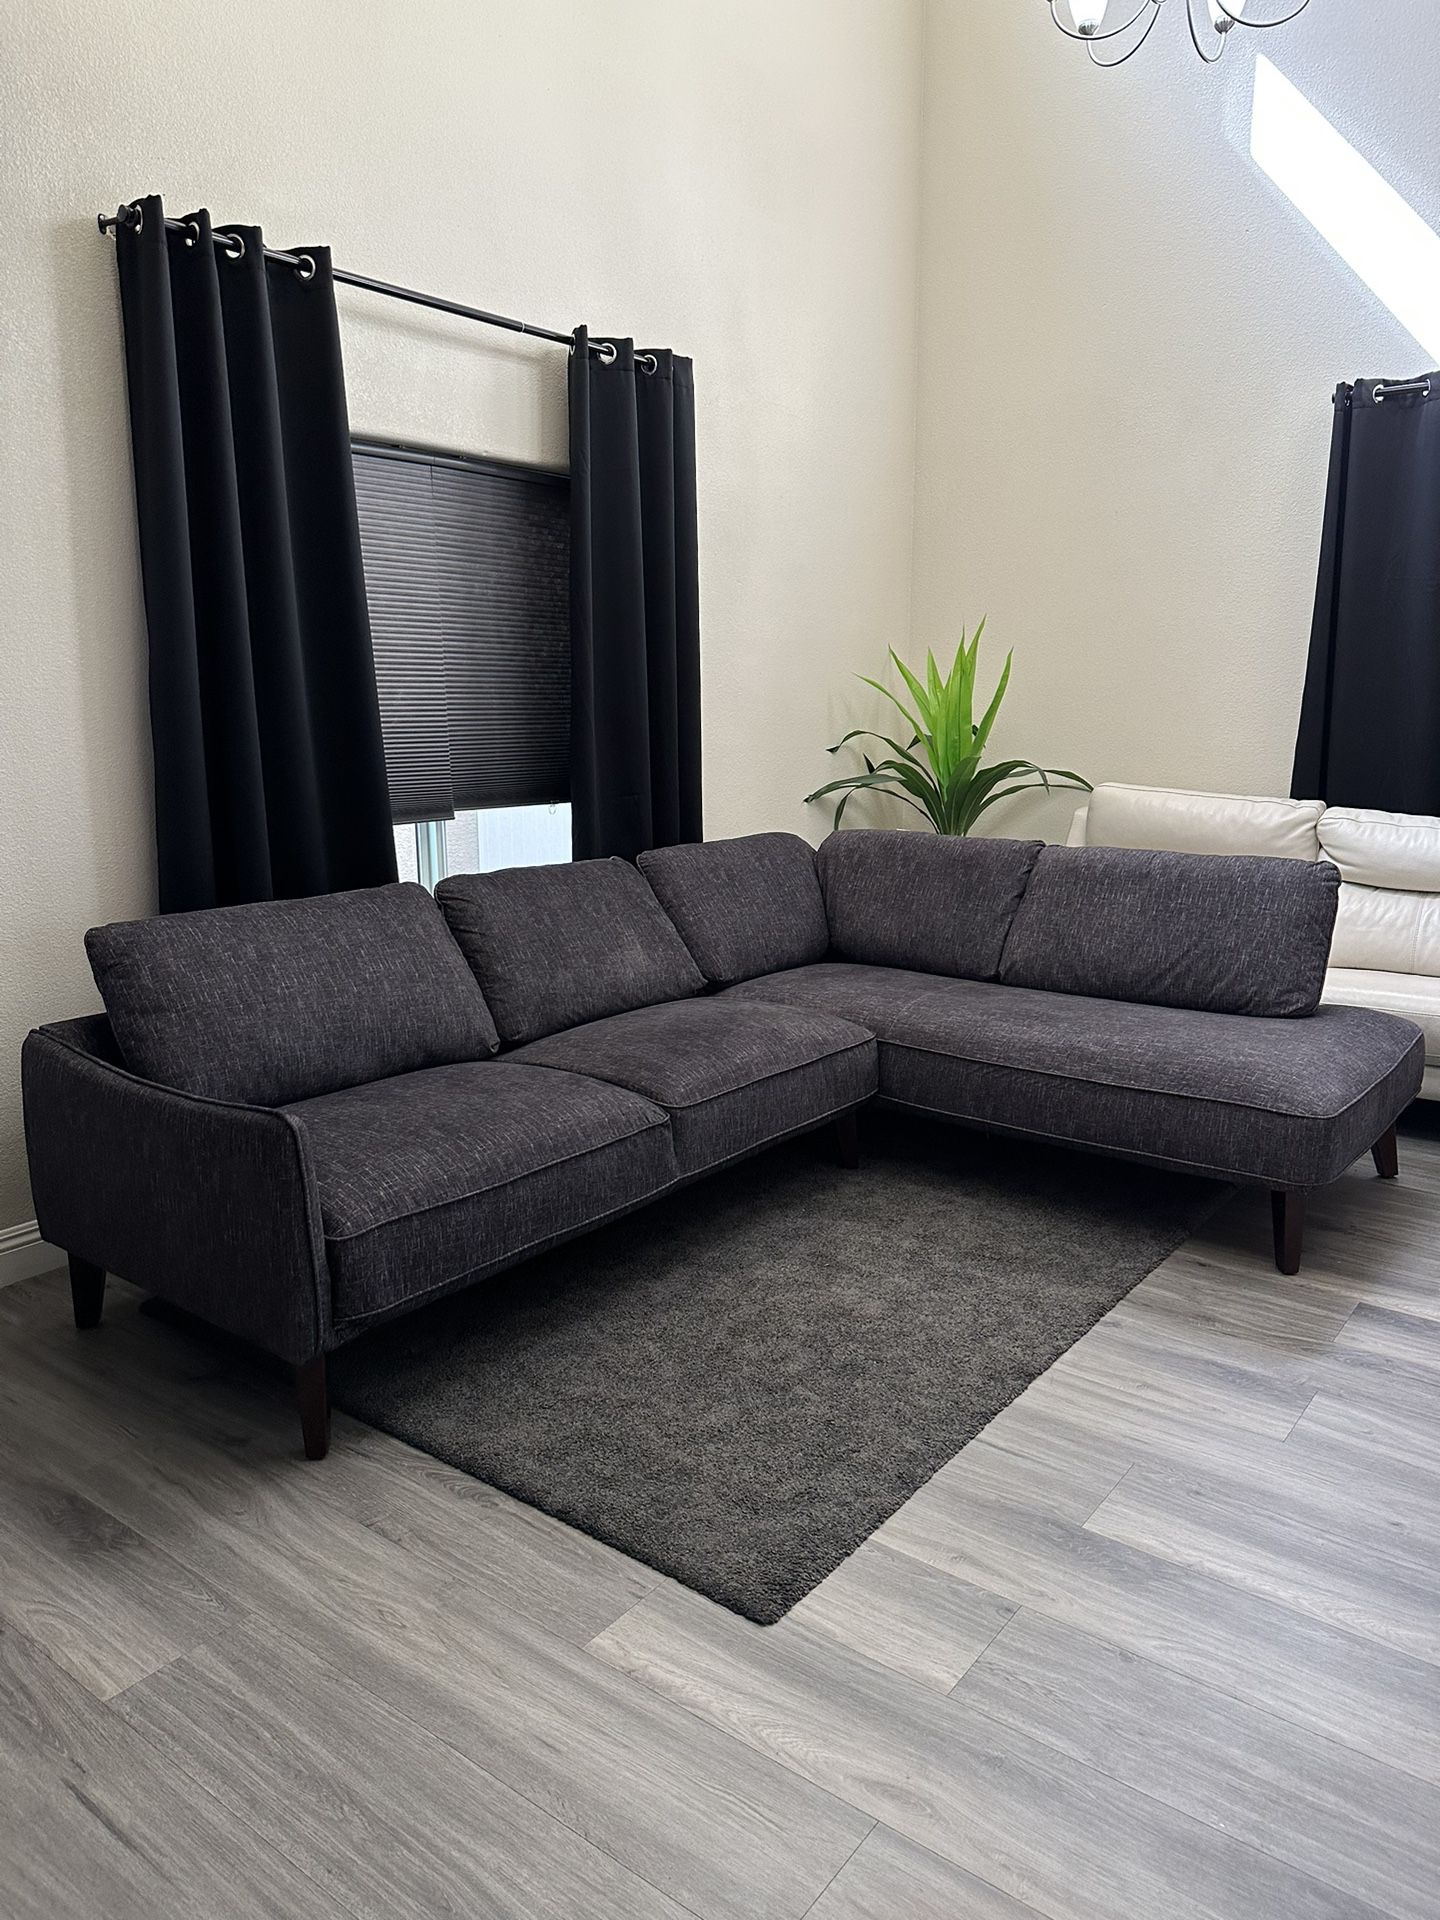 Modern Charcoal Grey Right-Facing Sectional Sofa Couch